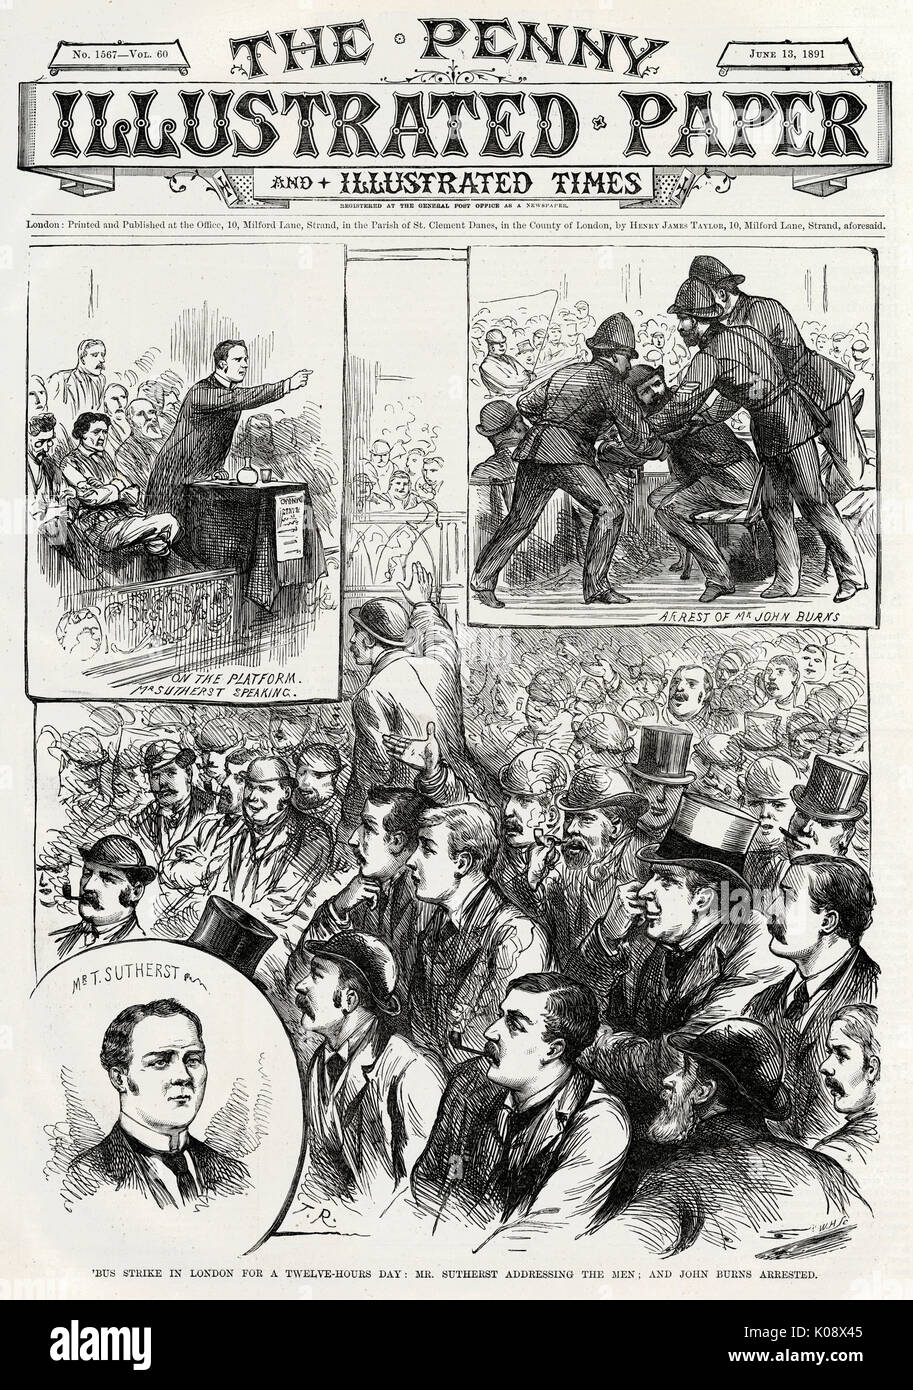 Front cover of 'The Penny Illustration Paper' showing the first strike by London transport workers in 1891, over working conditions and pay.      Date: 1891 Stock Photo